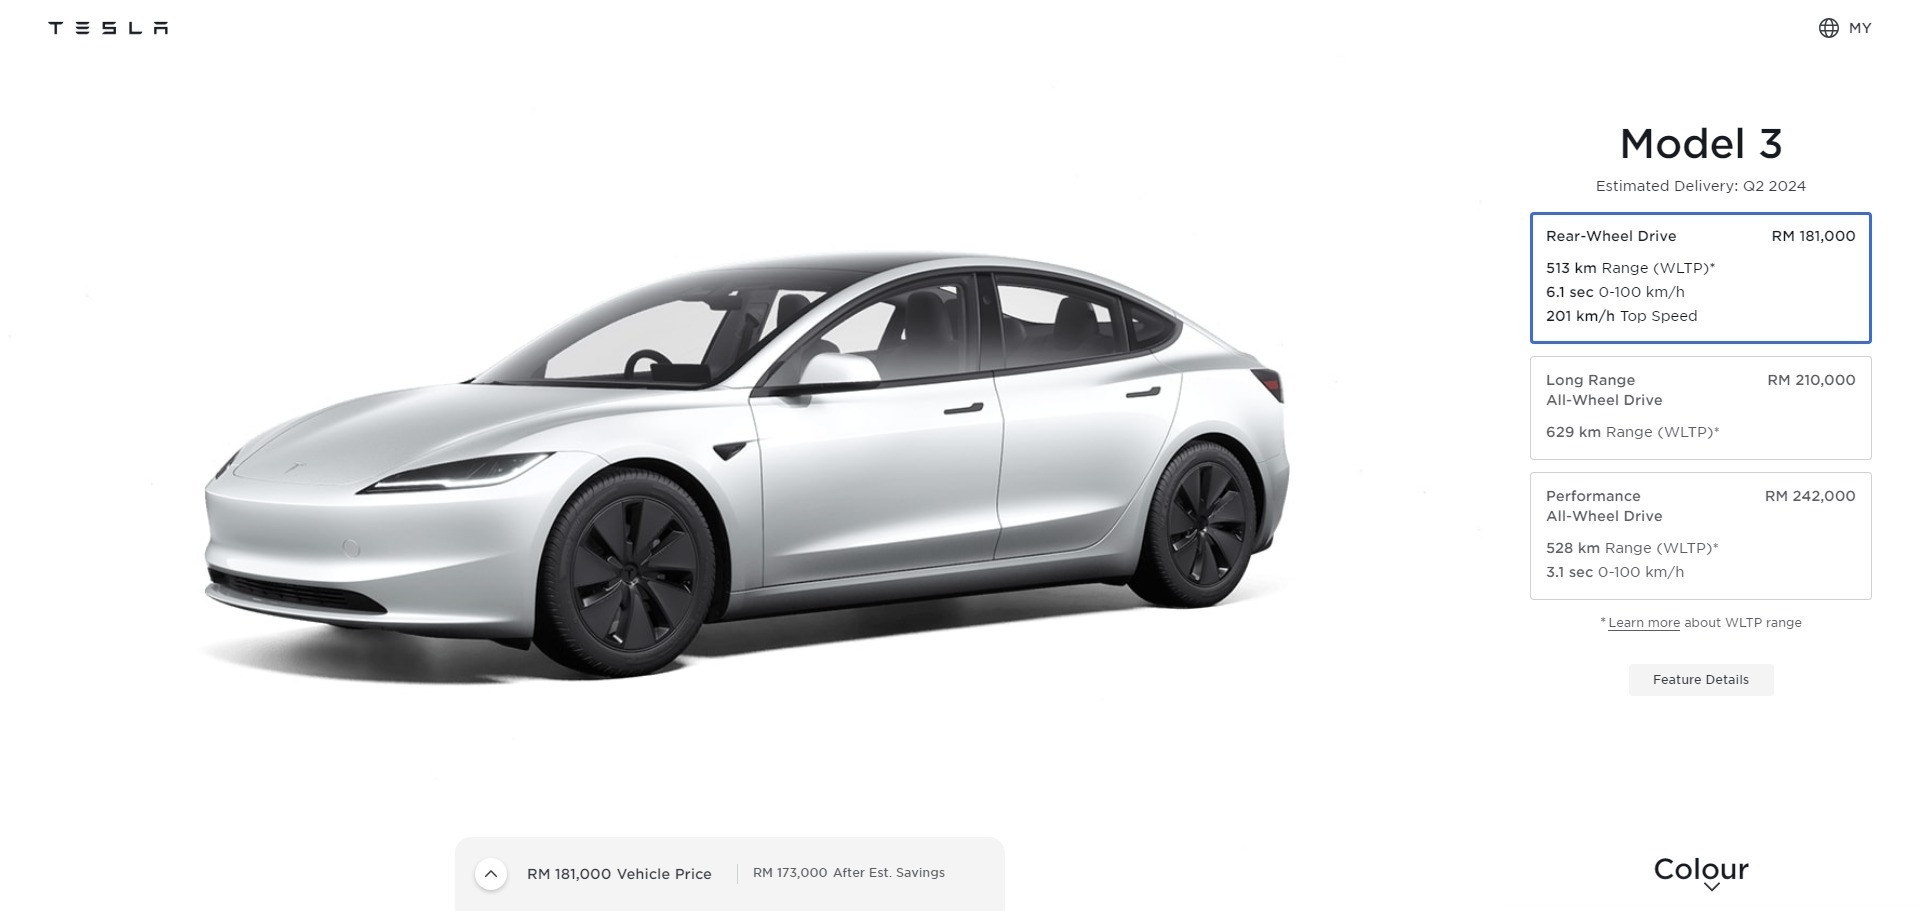 Tesla Model 3 Y price reductions Malaysia